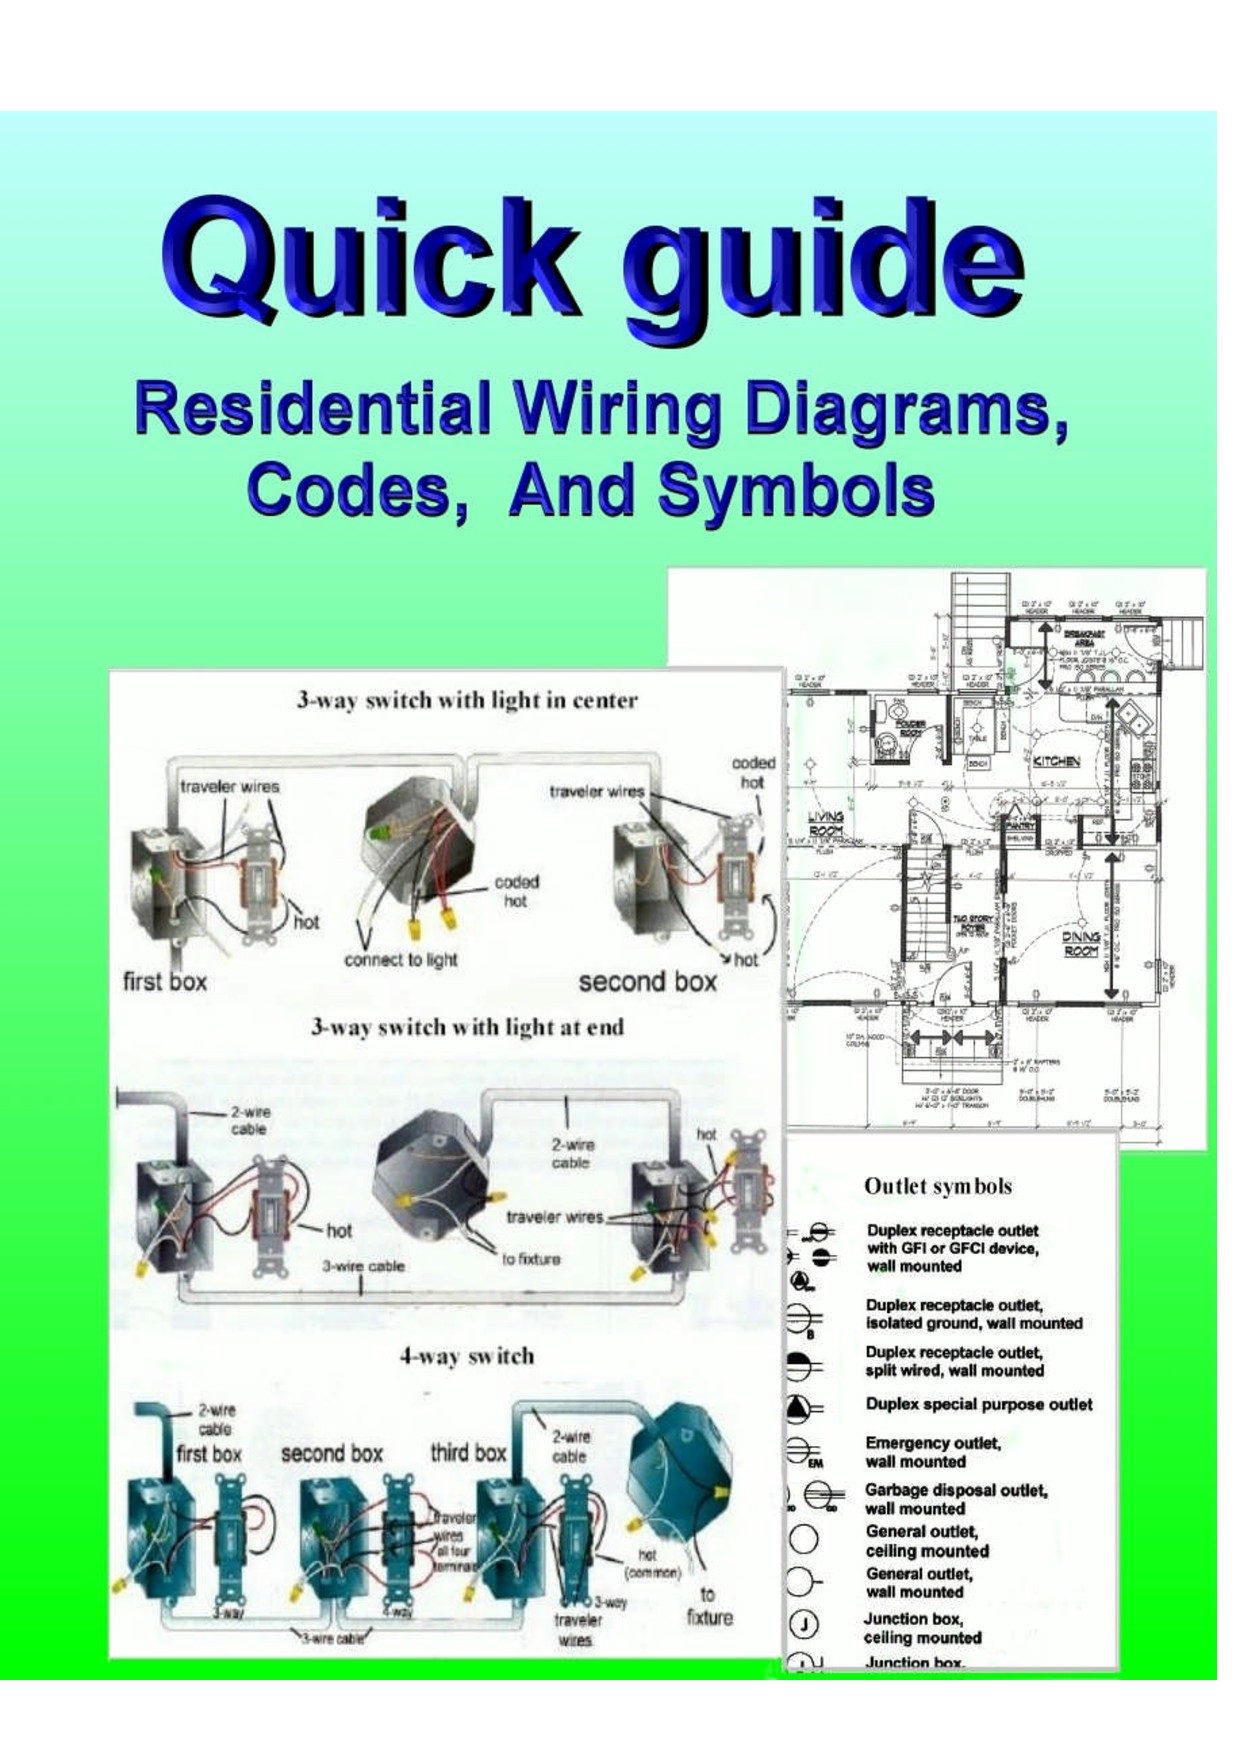 A step by step home wiring guide with diagrams symbols and electrical codes